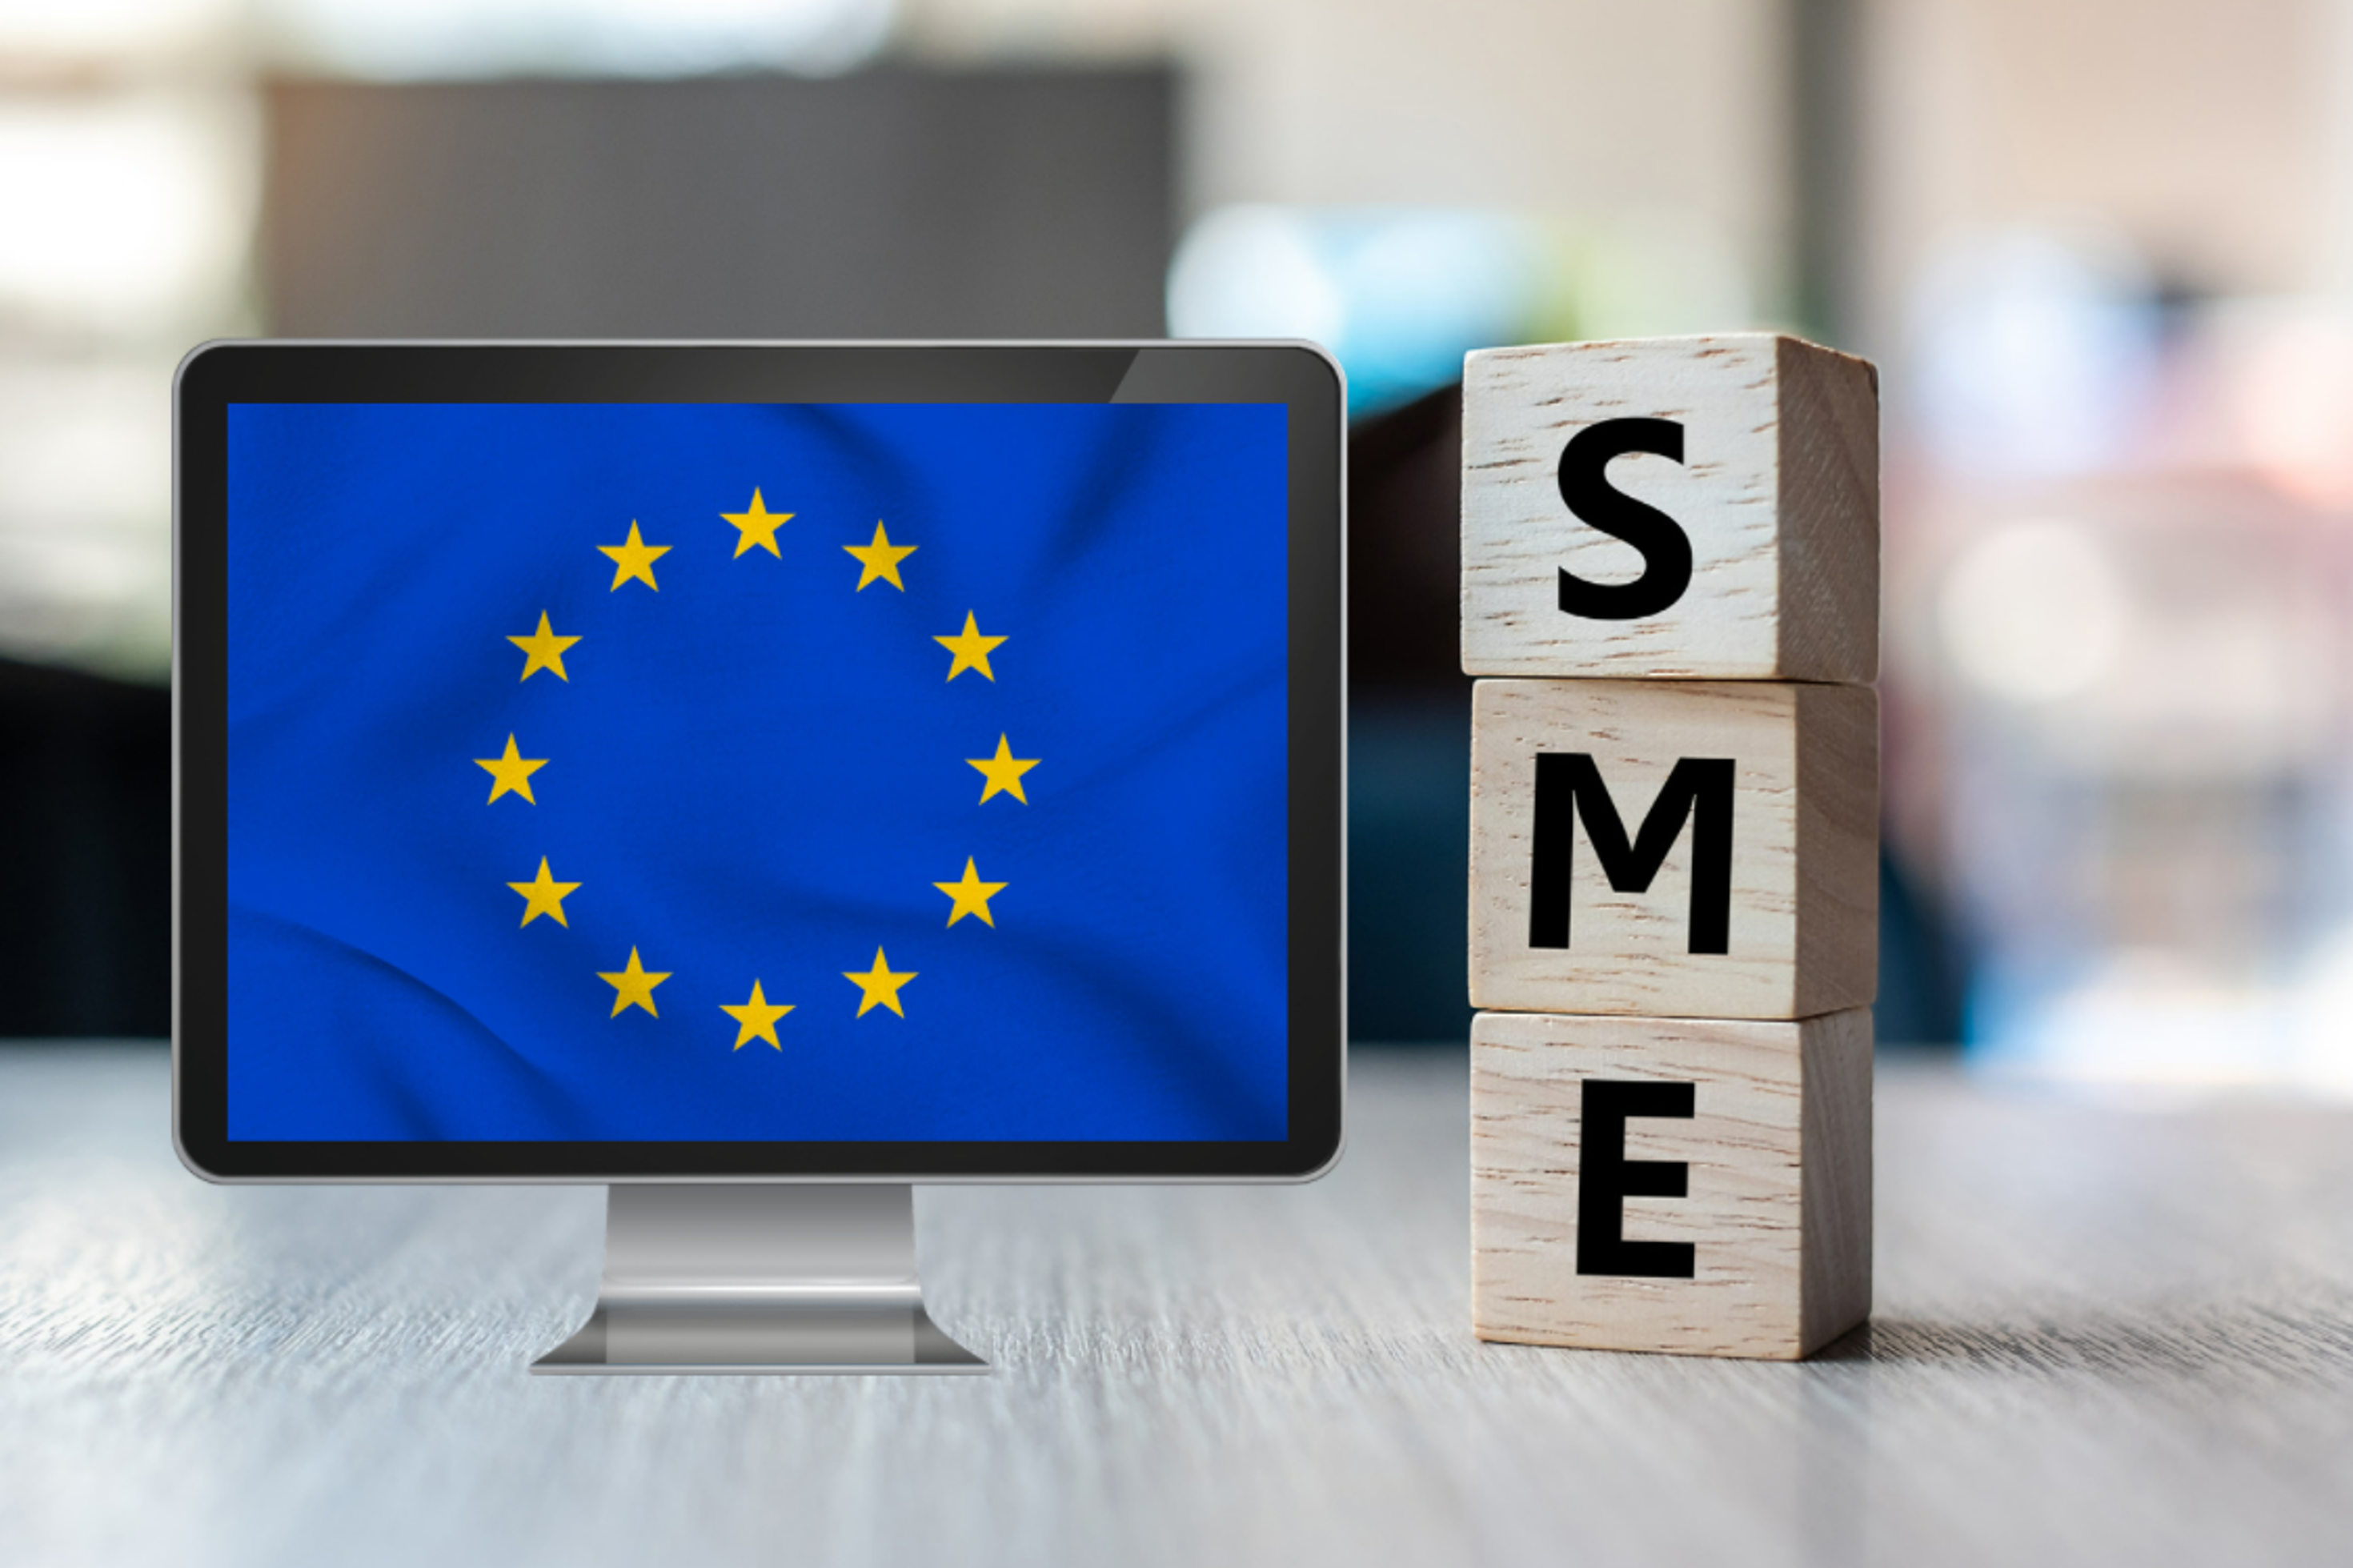 Microviable obtained SME rating from EMA